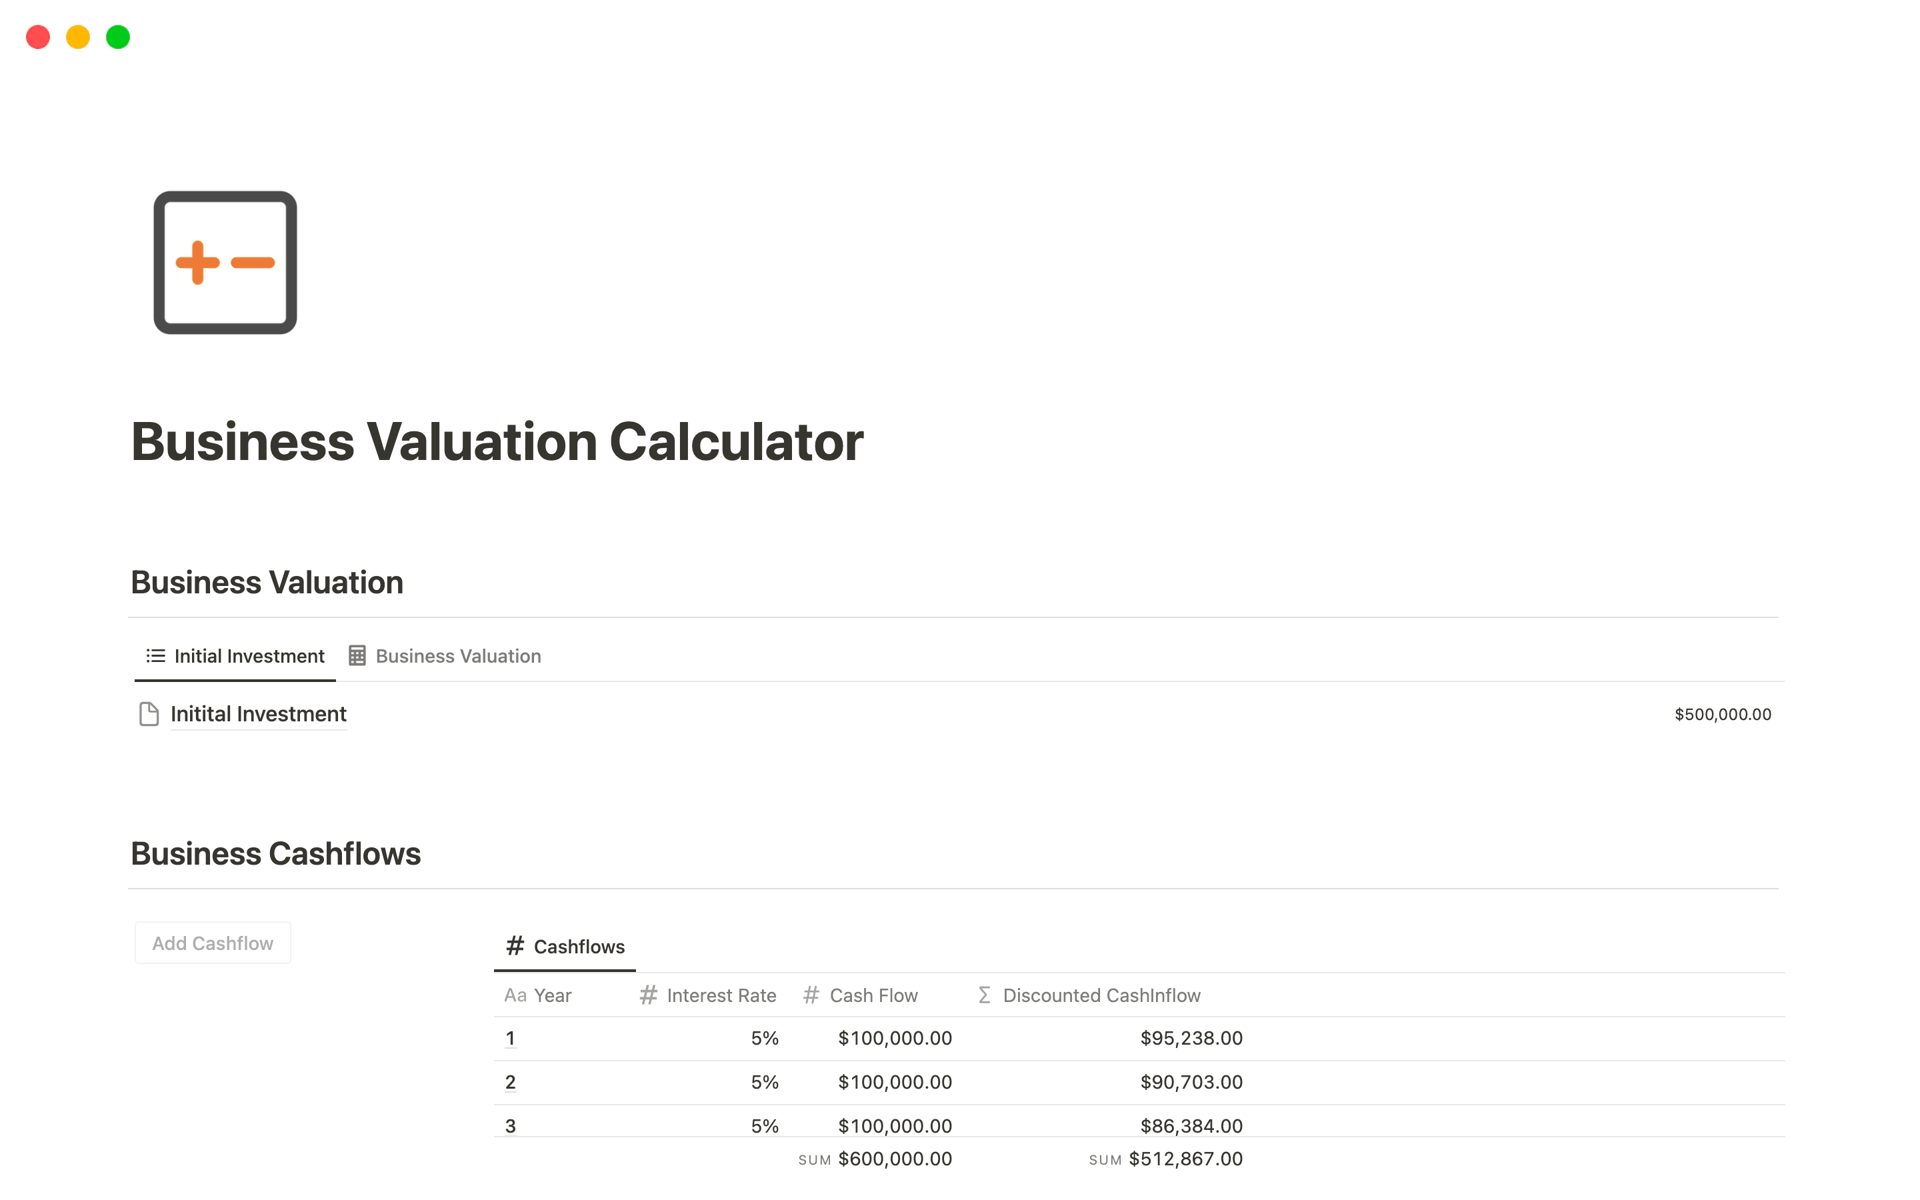 This template allows businesses to estimate their value using discounted cash flow (DCF) method and find if a business has a positive ROI or not.